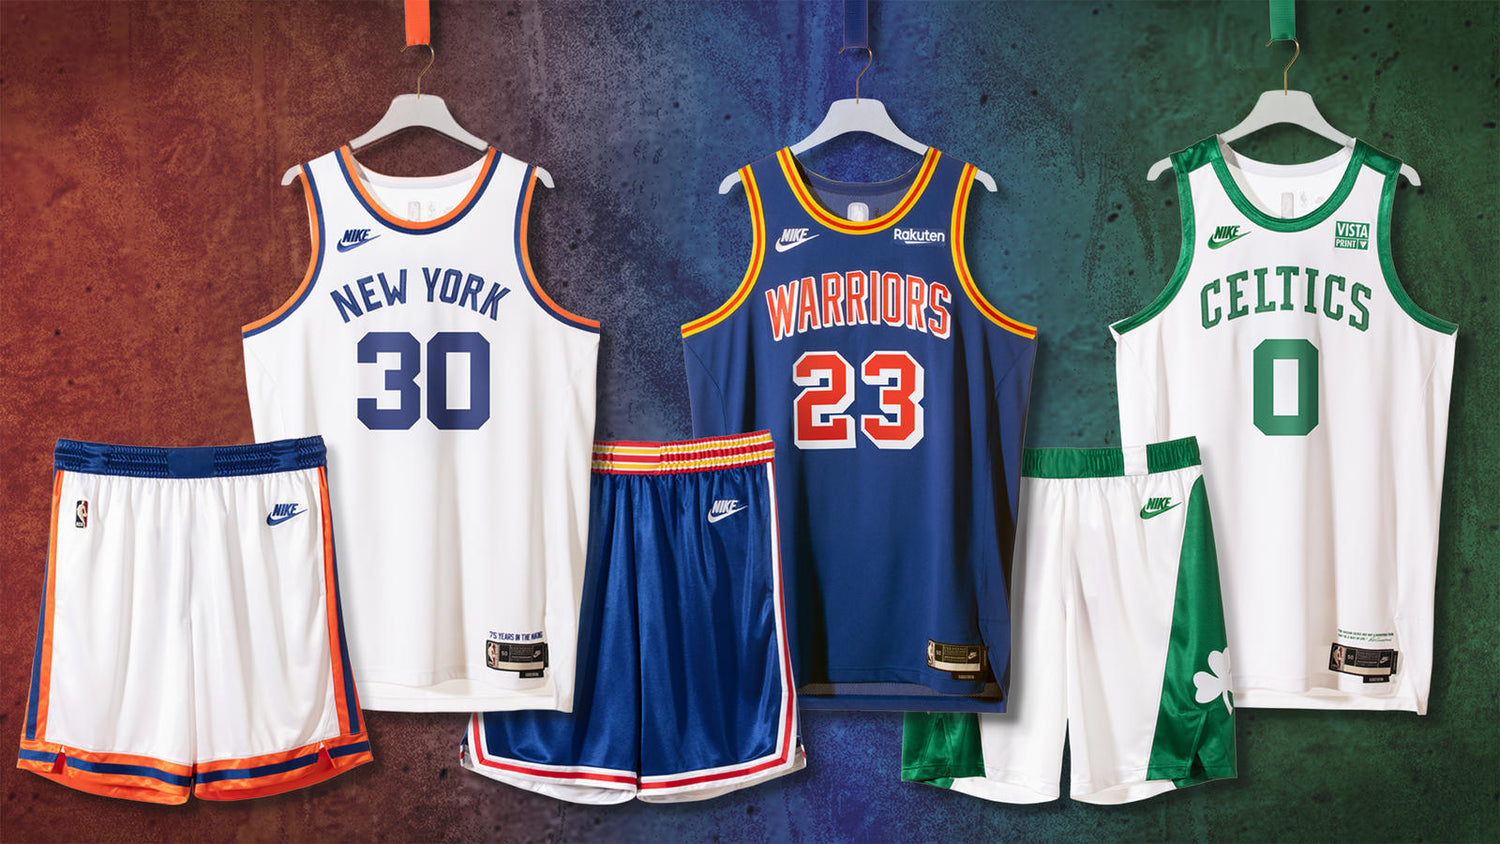 Nike Releases Classic Edition Uniforms for the NBA’s 75th Anniversary Season